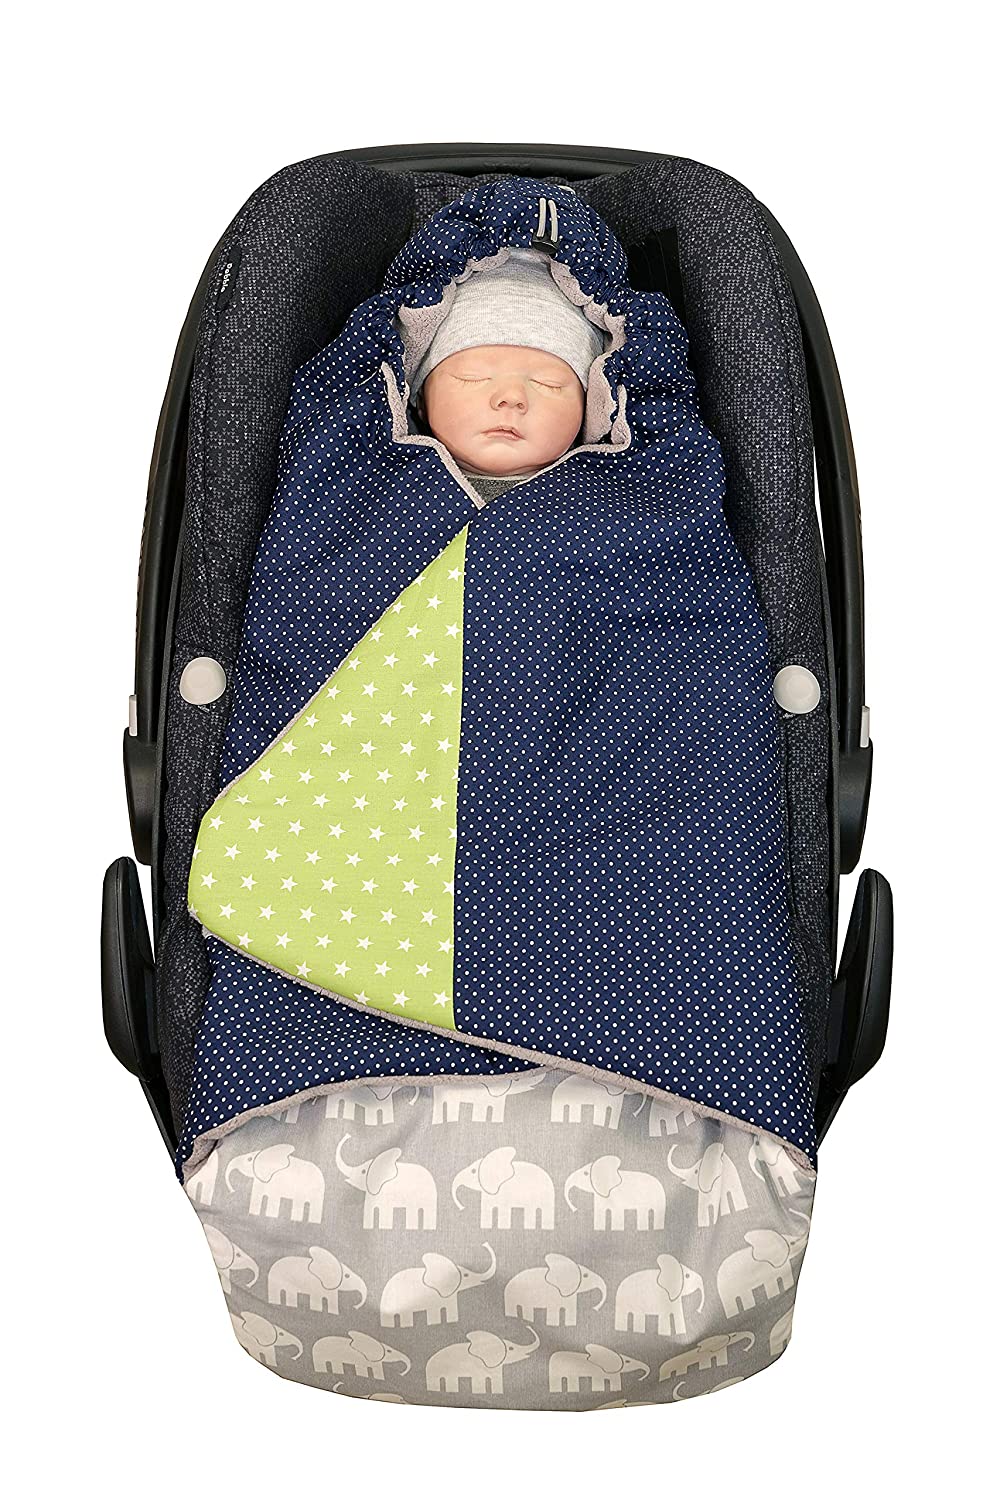 ULLENBOOM ® Swaddling Blanket Baby Car Seat Blue Light Grey (Made in EU) - Baby Blanket for Car Seat (e.g. Maxi Cosi®), baby bath or pram, ideal blanket for babies (0 to 9 months)